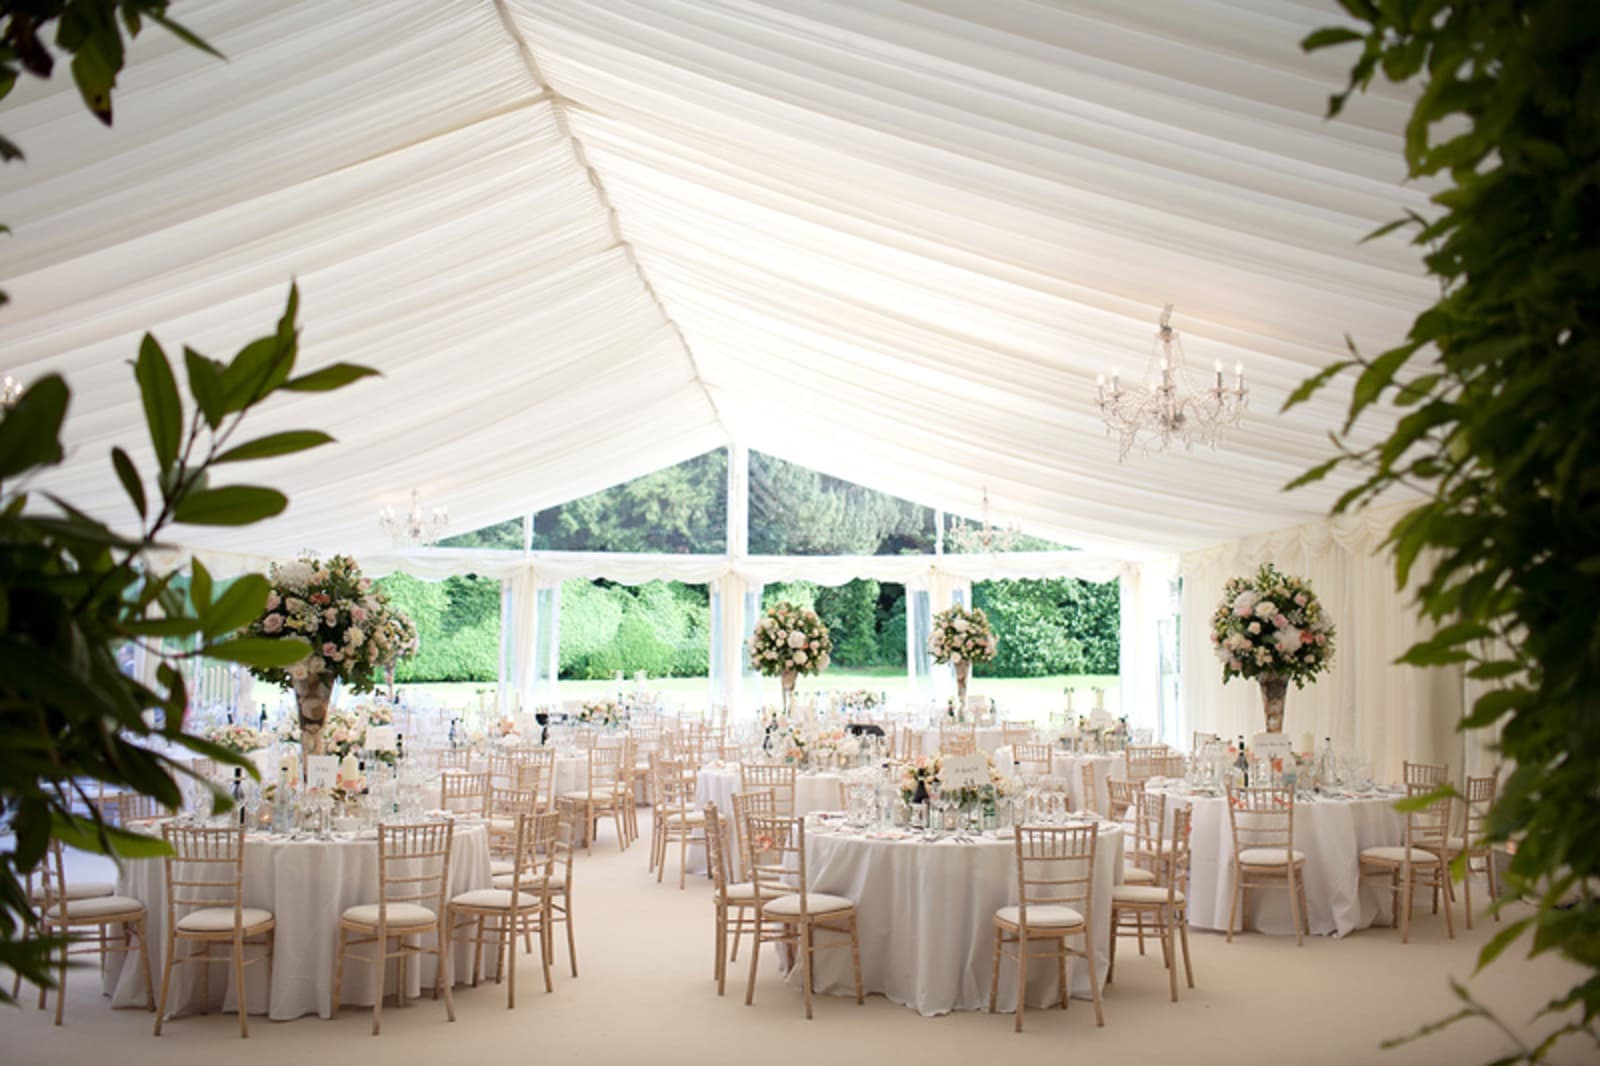 South West | Hampshire | Winchester | Summer | Classic | Country | Outdoor | Pink | Blue | Marquee | Real Wedding | Guy Hearn Photography #Bridebook #RealWedding #WeddingIdeas Bridebook.co.uk 